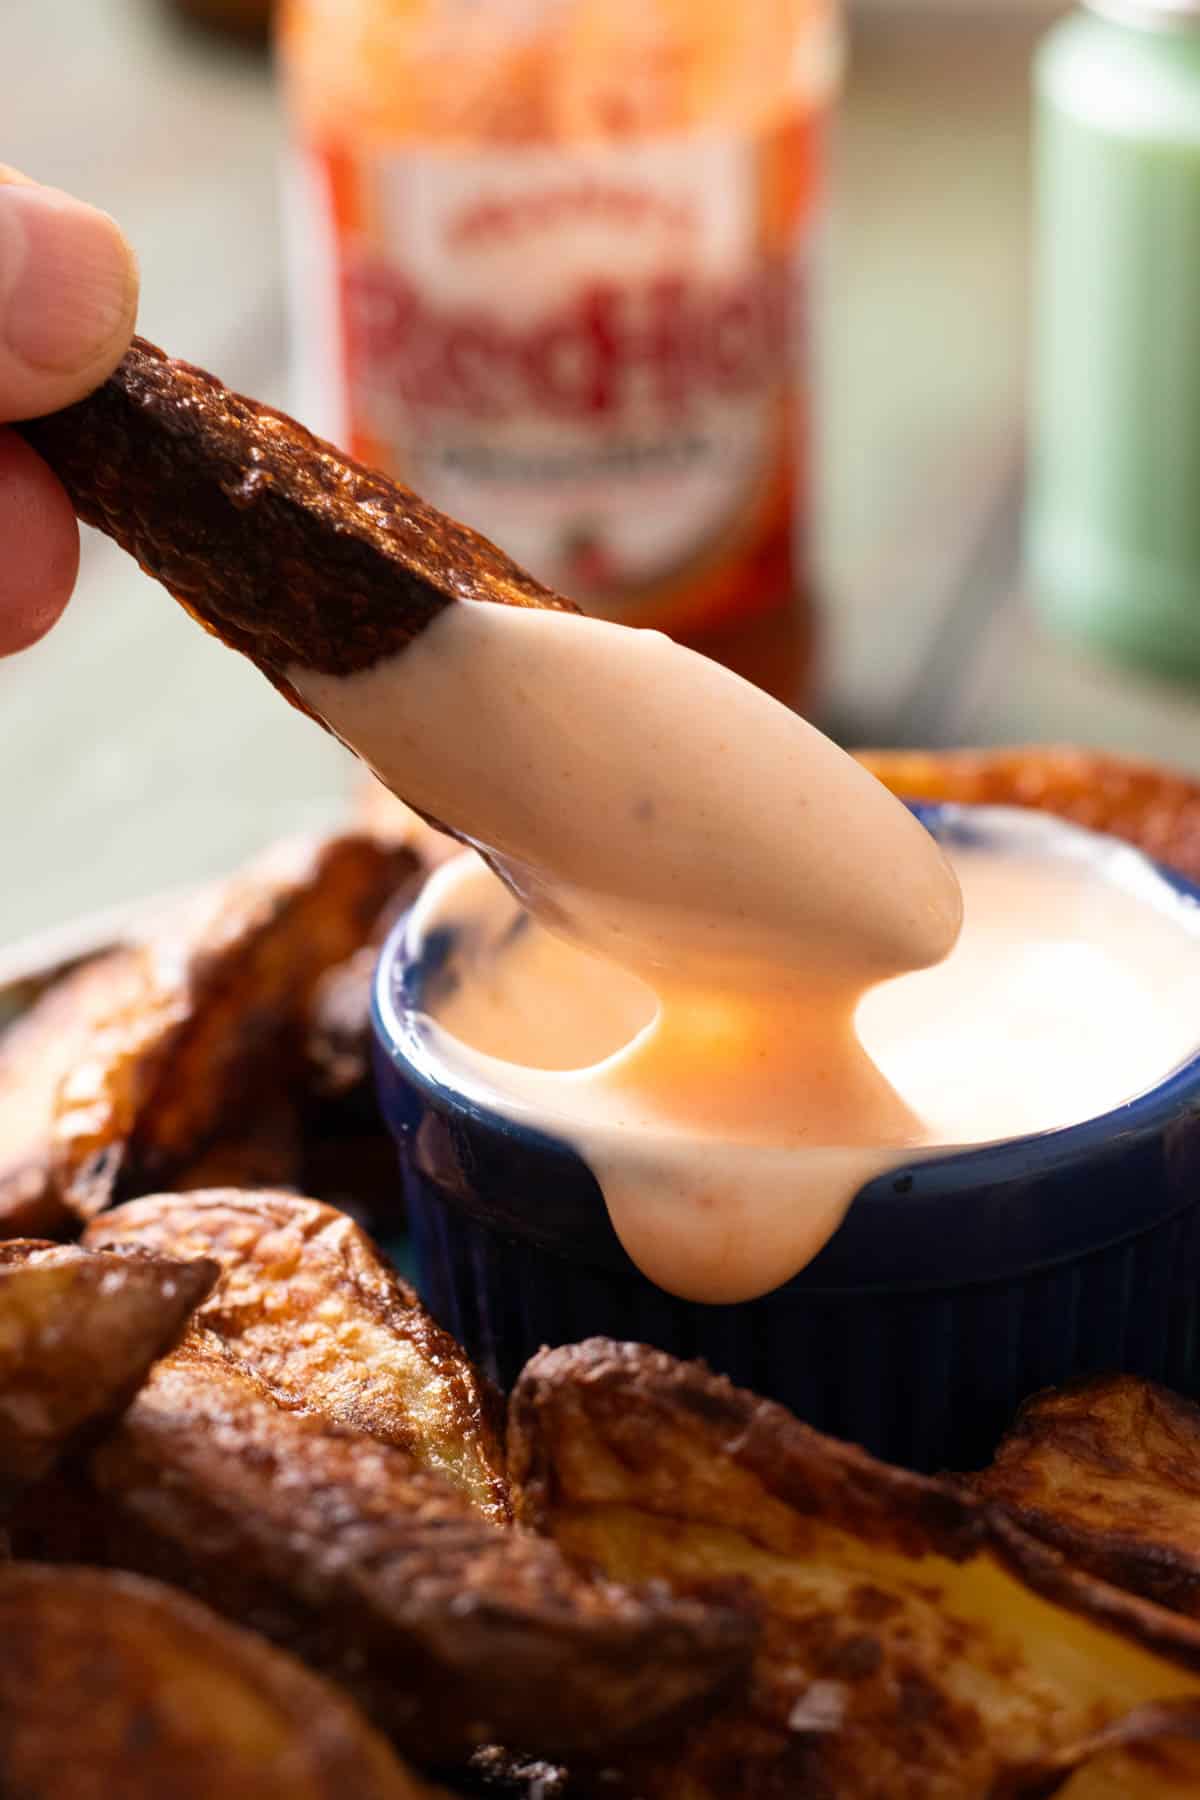 A steak fry being dipped in buffalo dipping sauce.